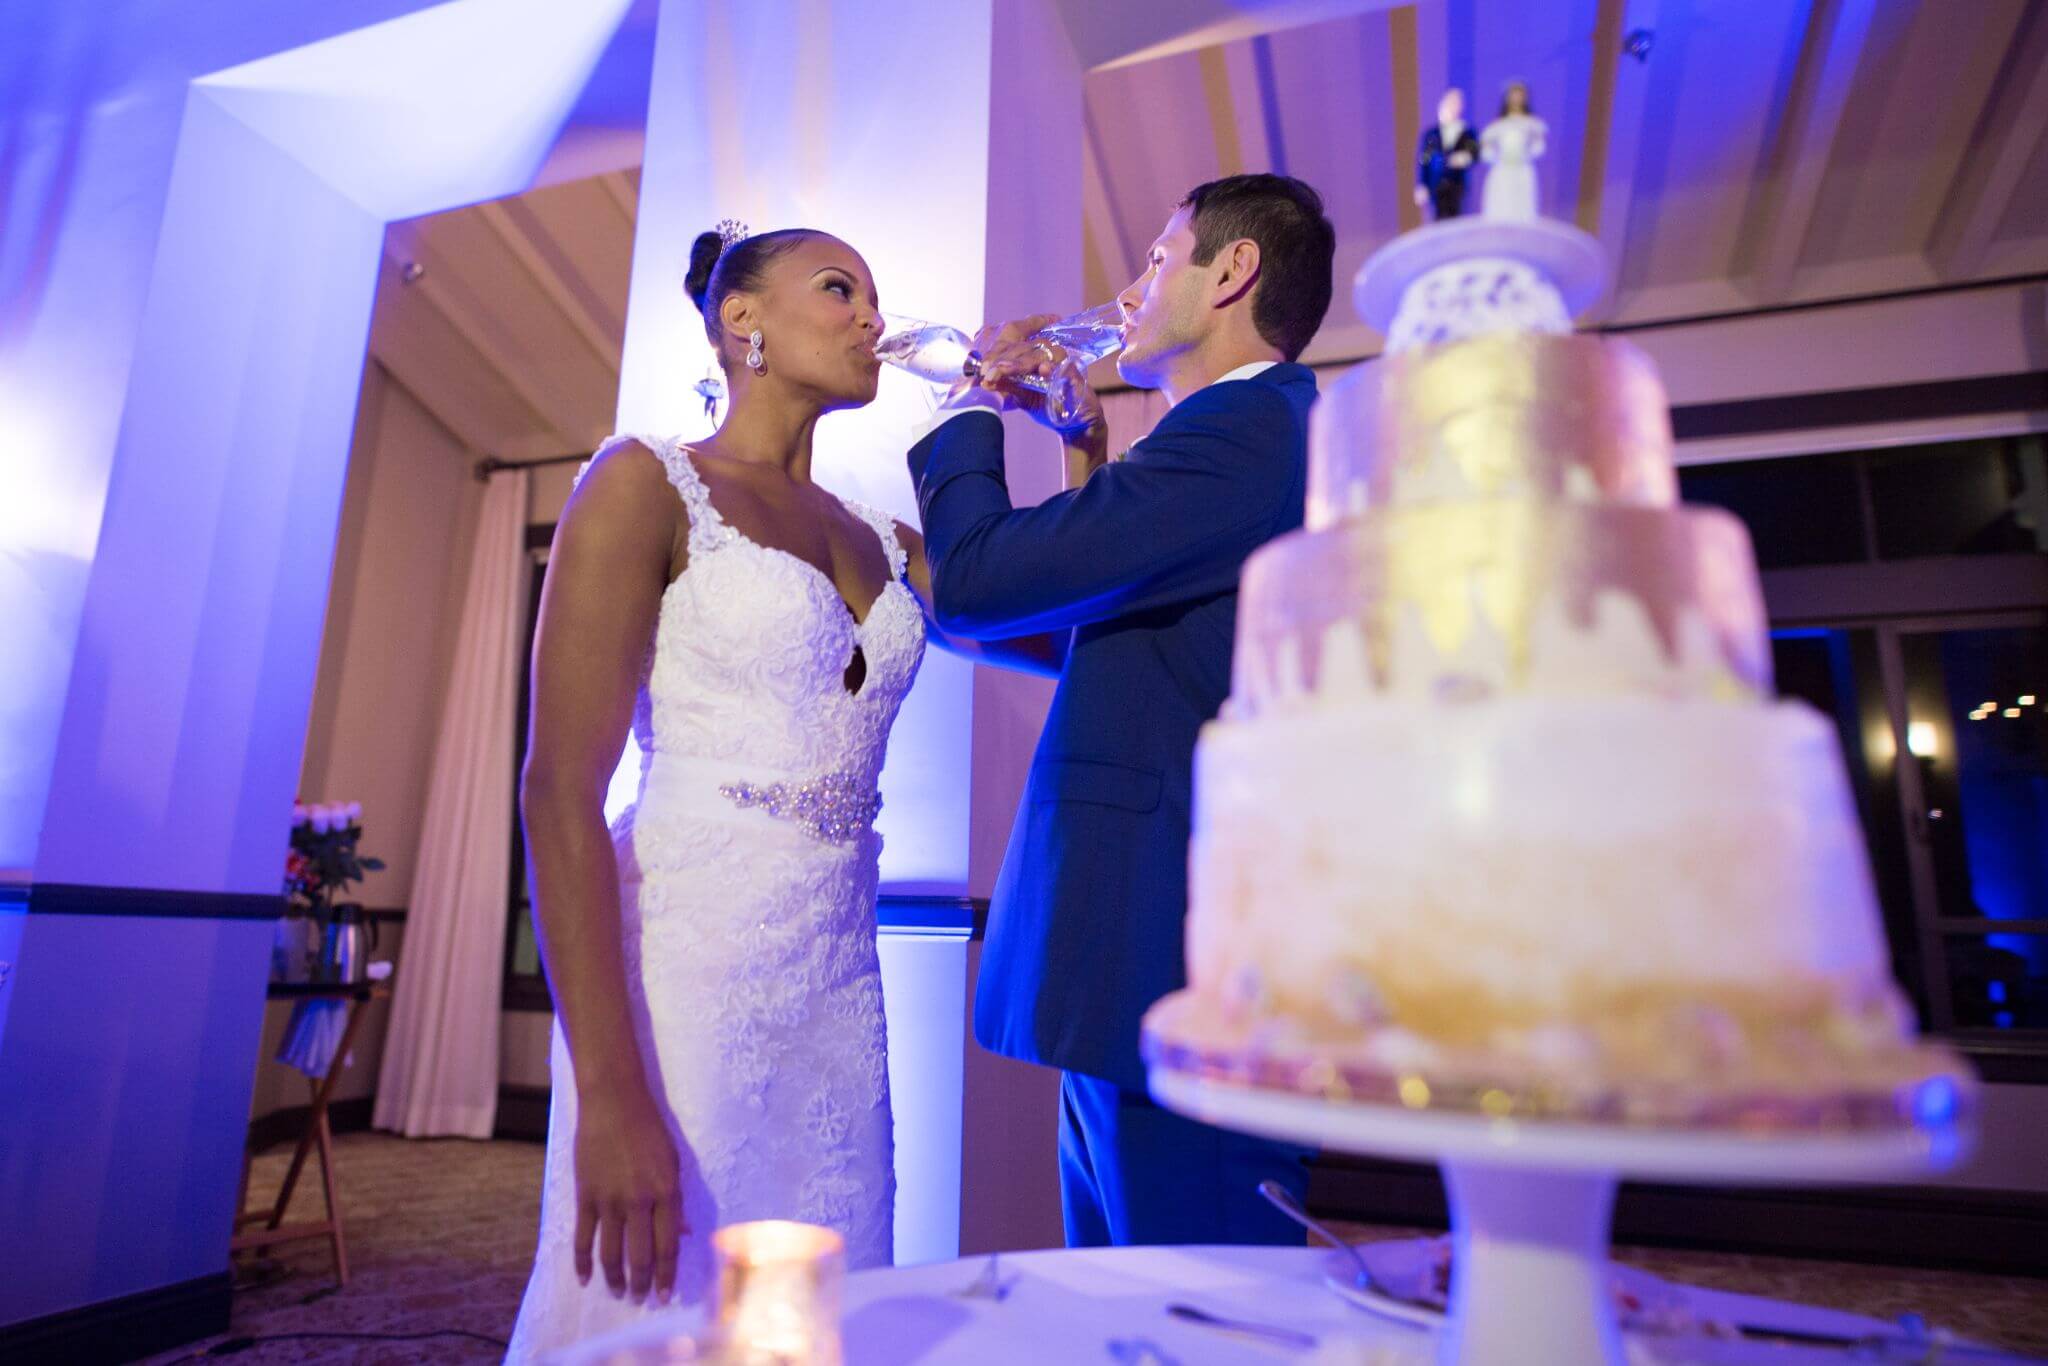 5 Ideas for an Unforgettable Champagne Toast at Your Wedding